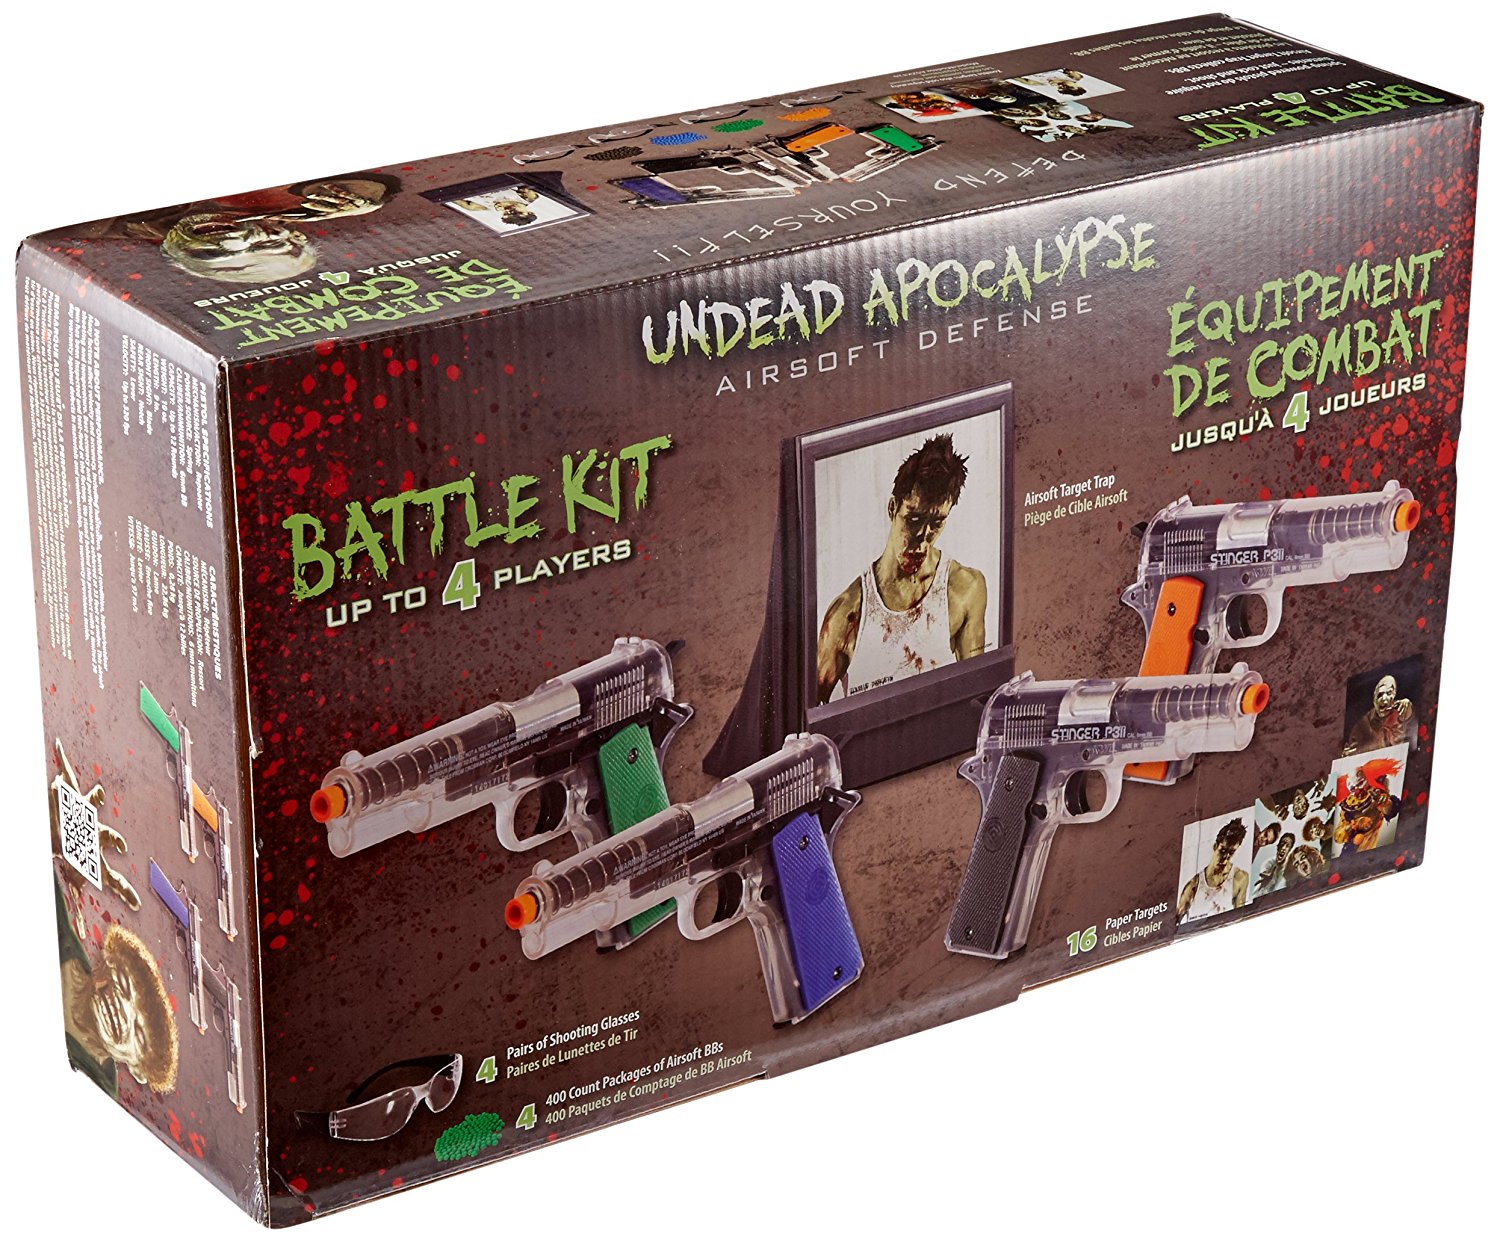 Undead Apocalypse Zombie Airsoft Gun Fun Kit – Includes 4 Pistols and 4 Goggles! Just $26.80!